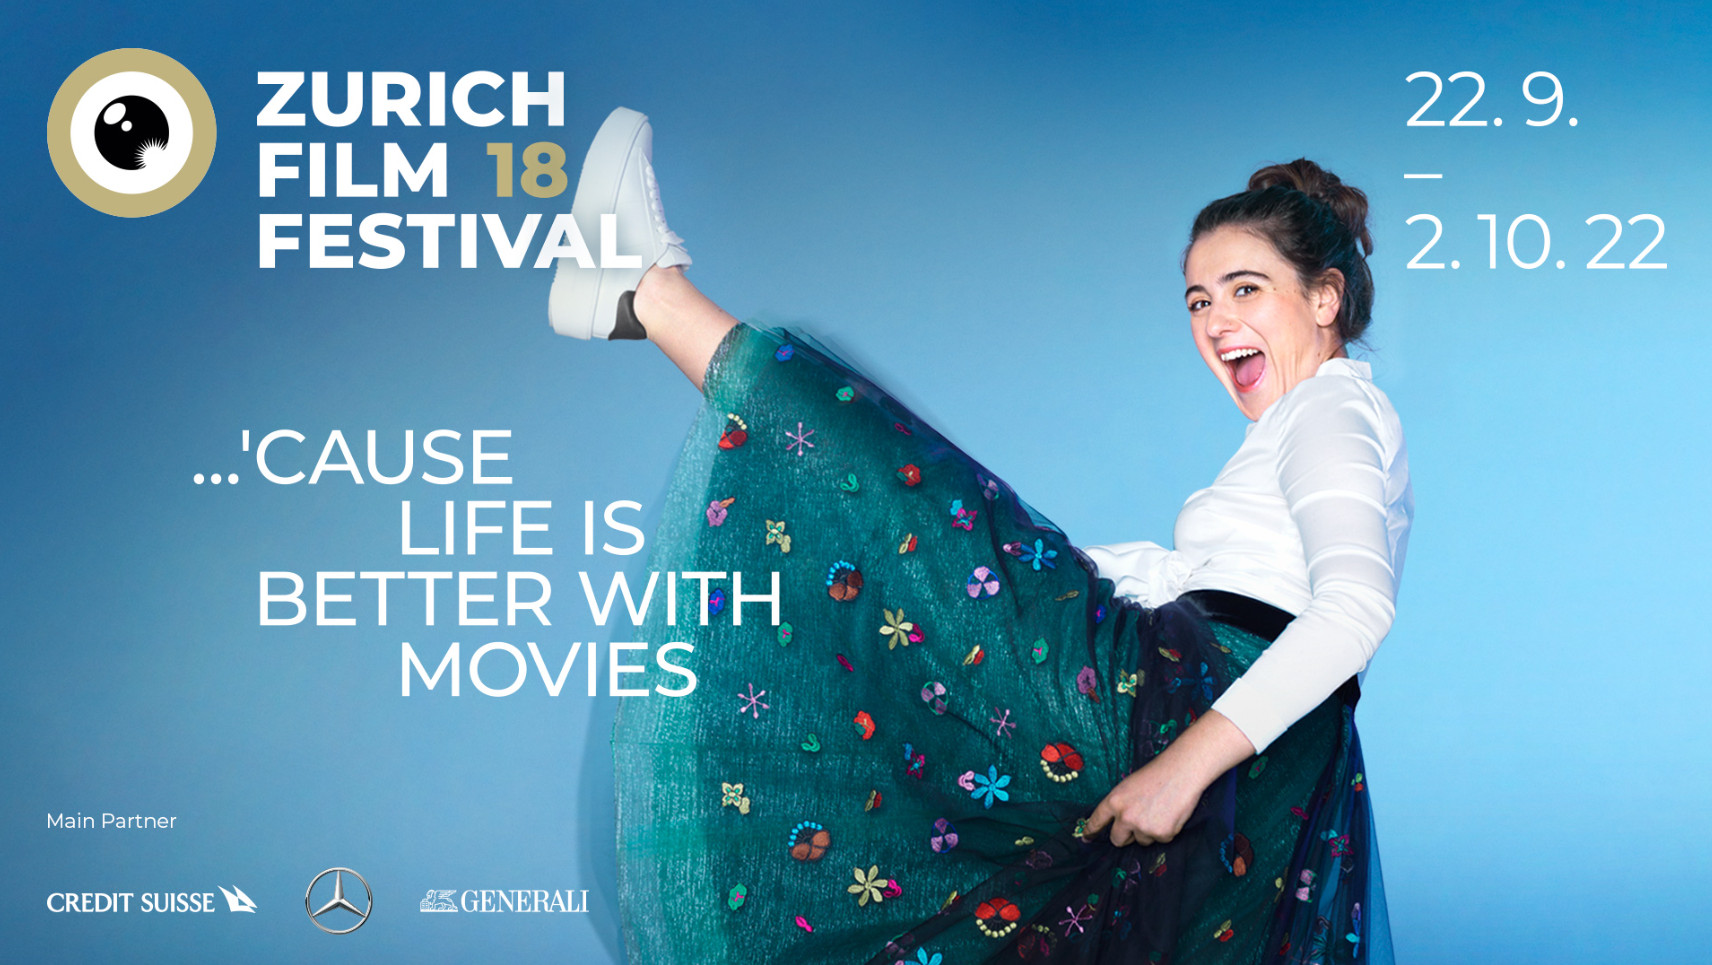 Spain is zurich film festival guest country